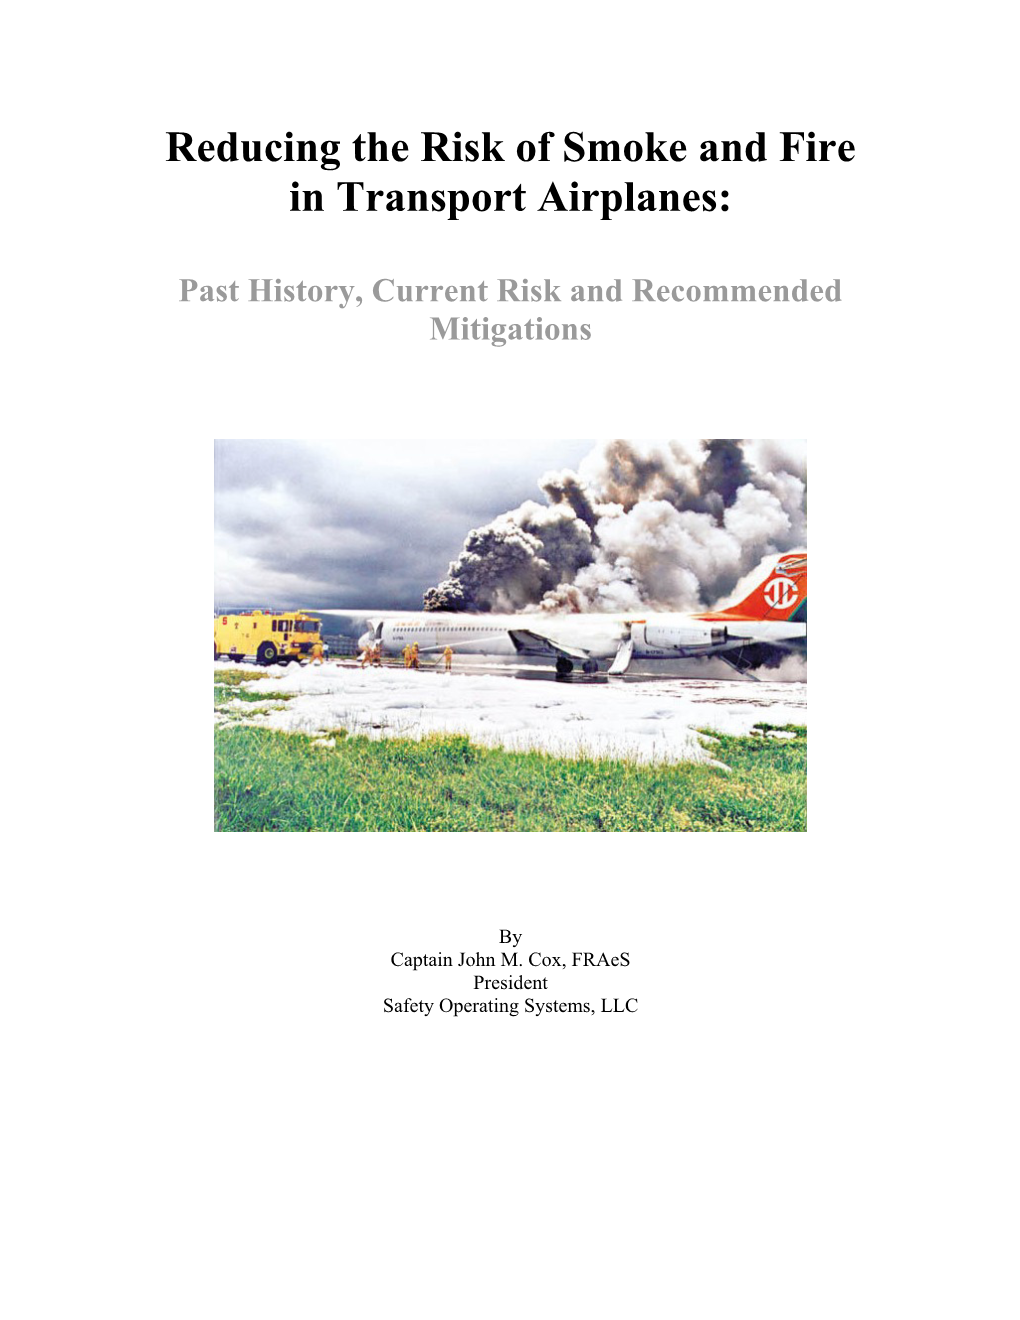 Reducing the Risk of Smoke and Fire in Transport Airplanes